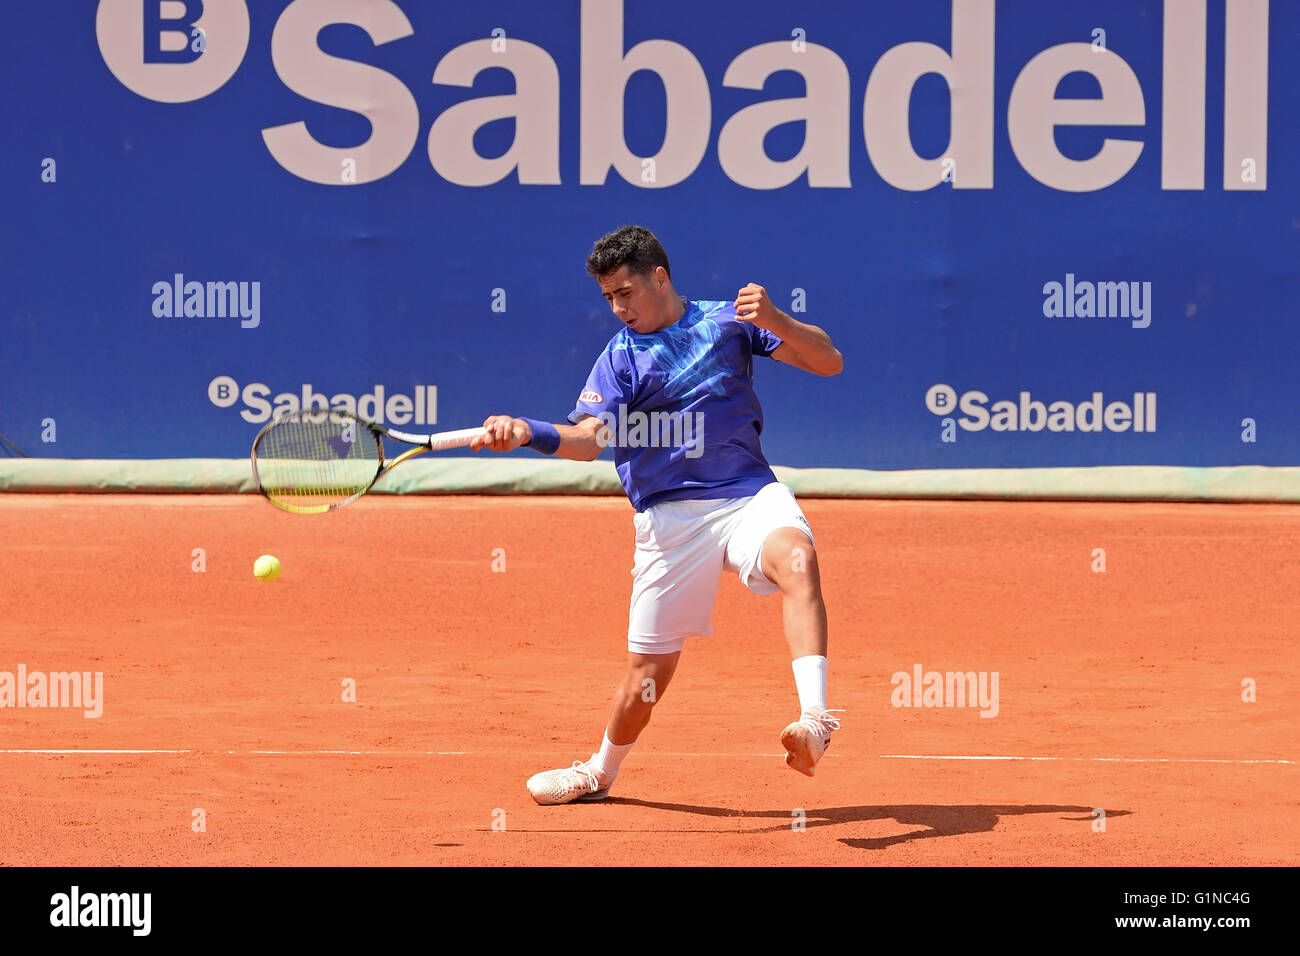 BARCELONA - APR 18: Jaume Munar (Spanish tennis player) plays at the ATP Barcelona Open. Stock Photo